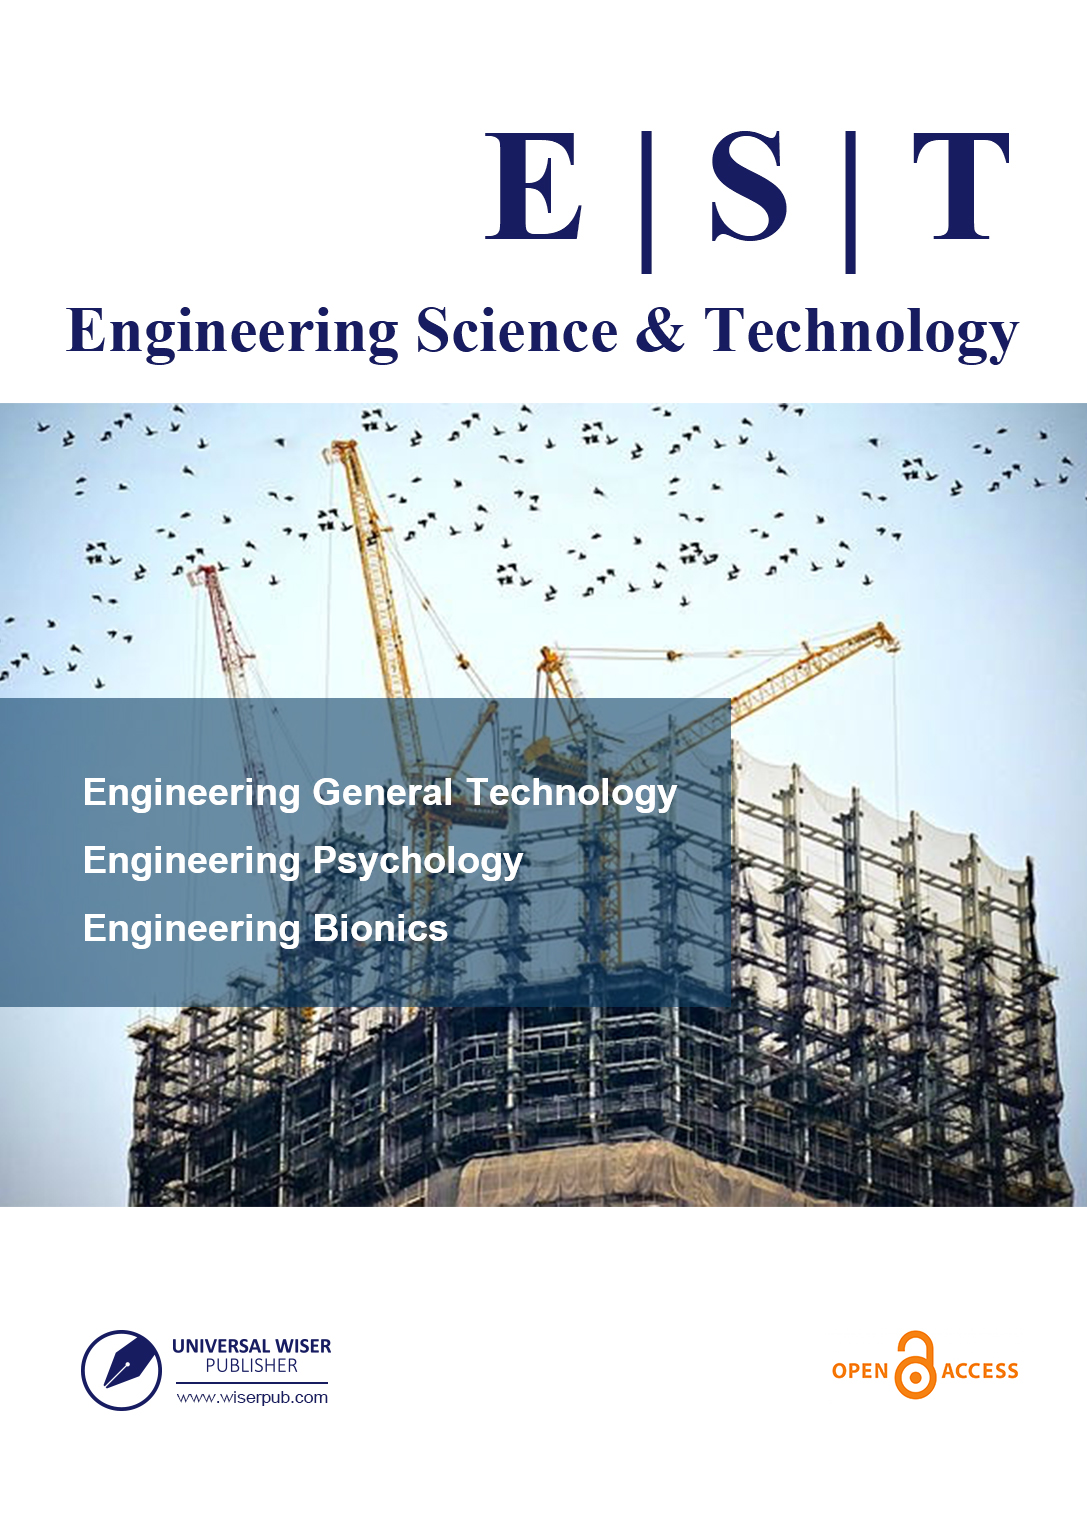 Engineering Science & Technology